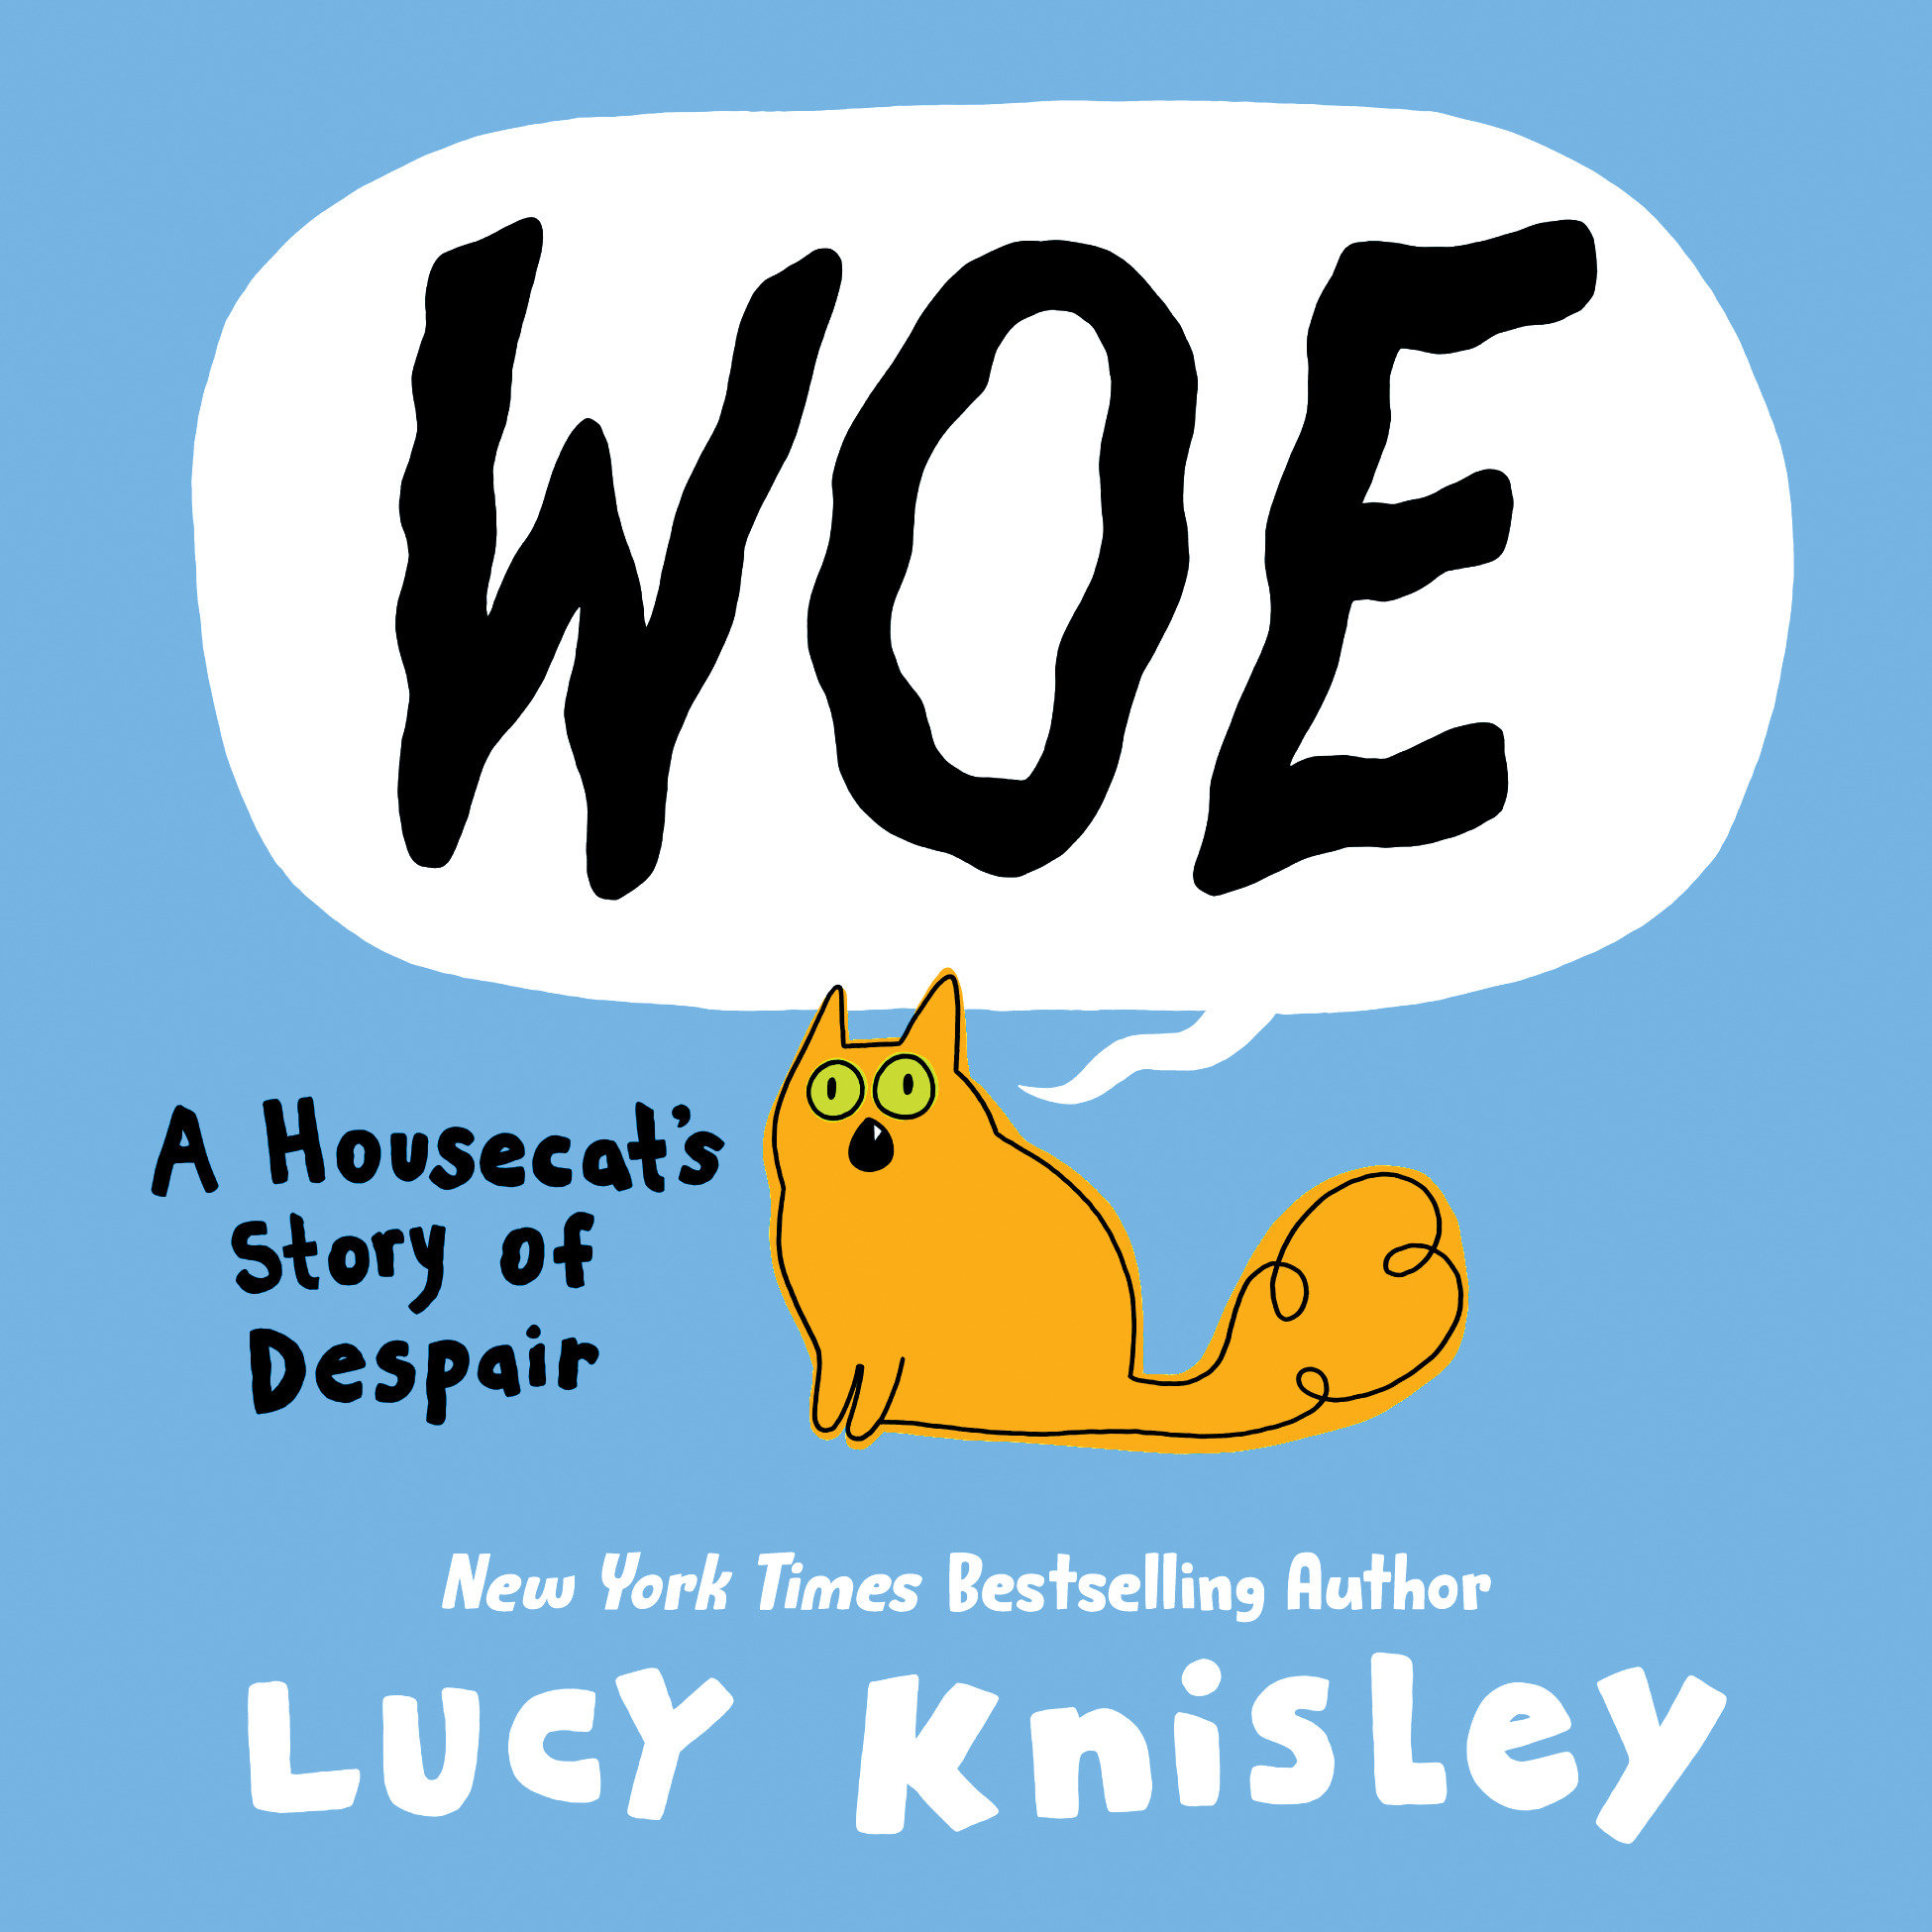 Woe A Housecat's Story of Despair Hardcover Graphic Novel